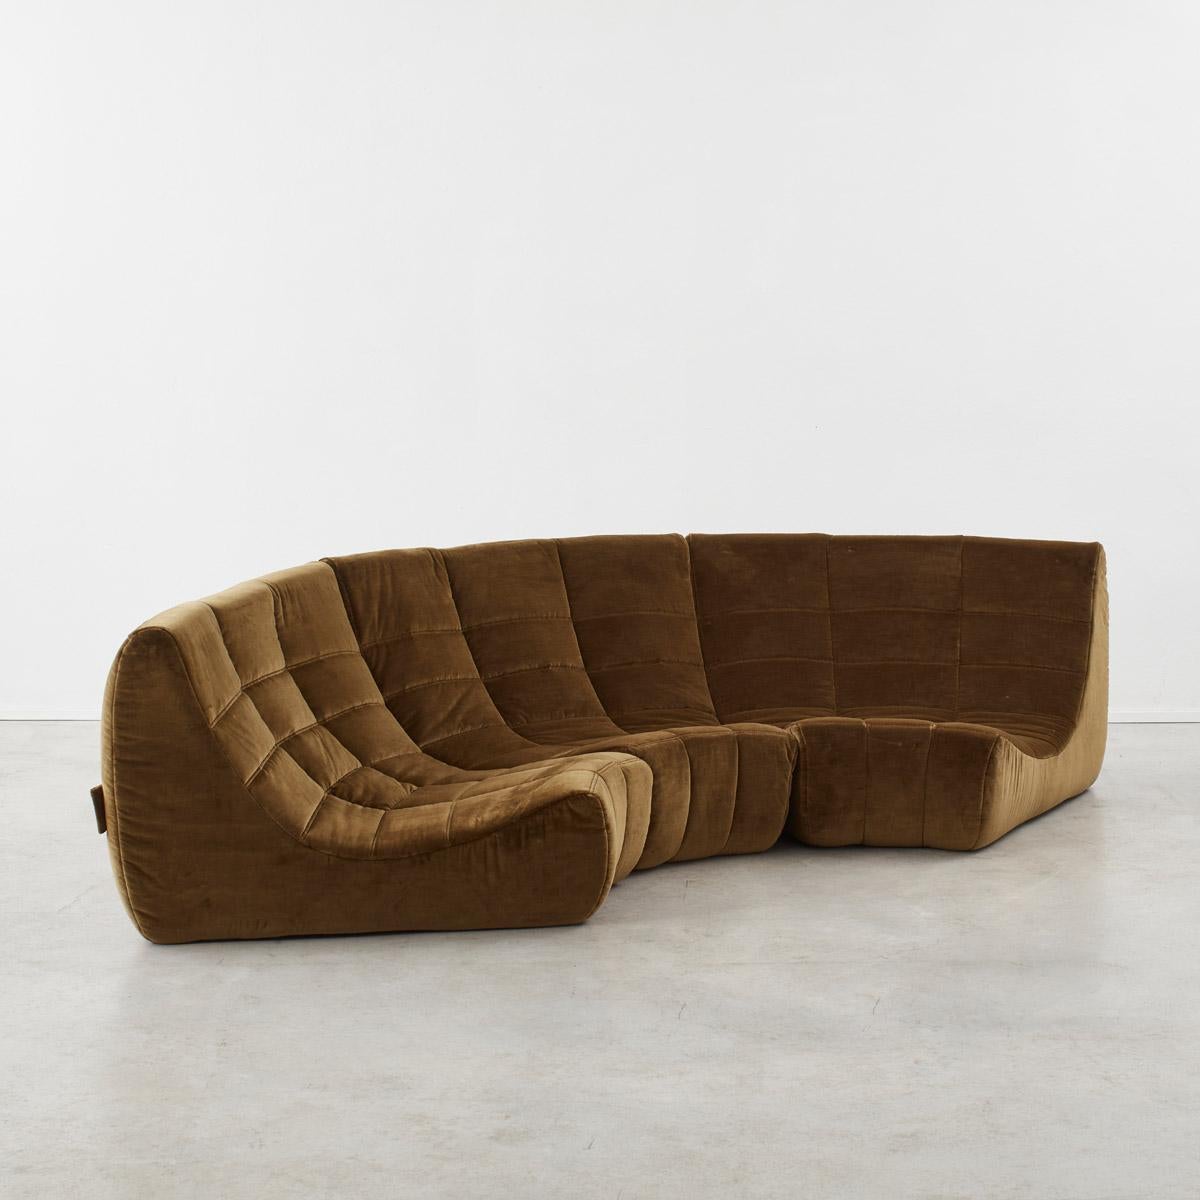 The Gilda sofa, composed of comfortable curved modules, is a rare sibling to Michel Ducaroy’s famous Toga sofa. A student of sculpture at École Nationale Supérieure des Beaux-Arts in Lyon, Ducaroy was primarily concerned with form and shape.